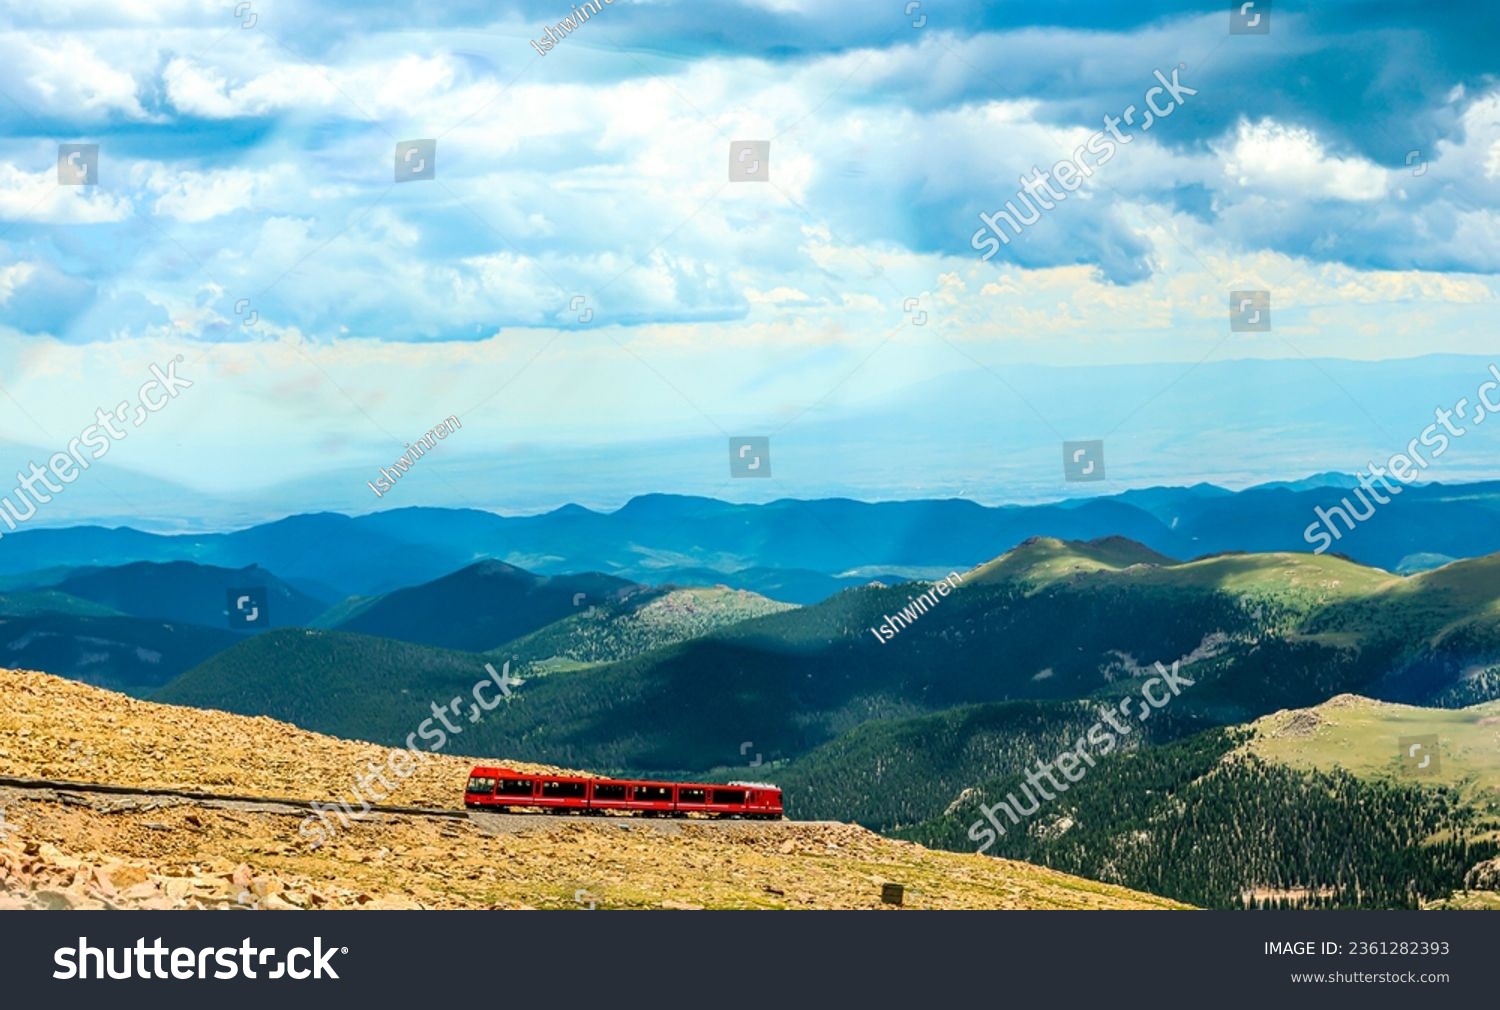 The Broadmoor Manitou and Pikes Peak Cog Railway is a cog railway that climbs one of the most iconic mountains in the United States, Pikes Peak in Colorado #2361282393